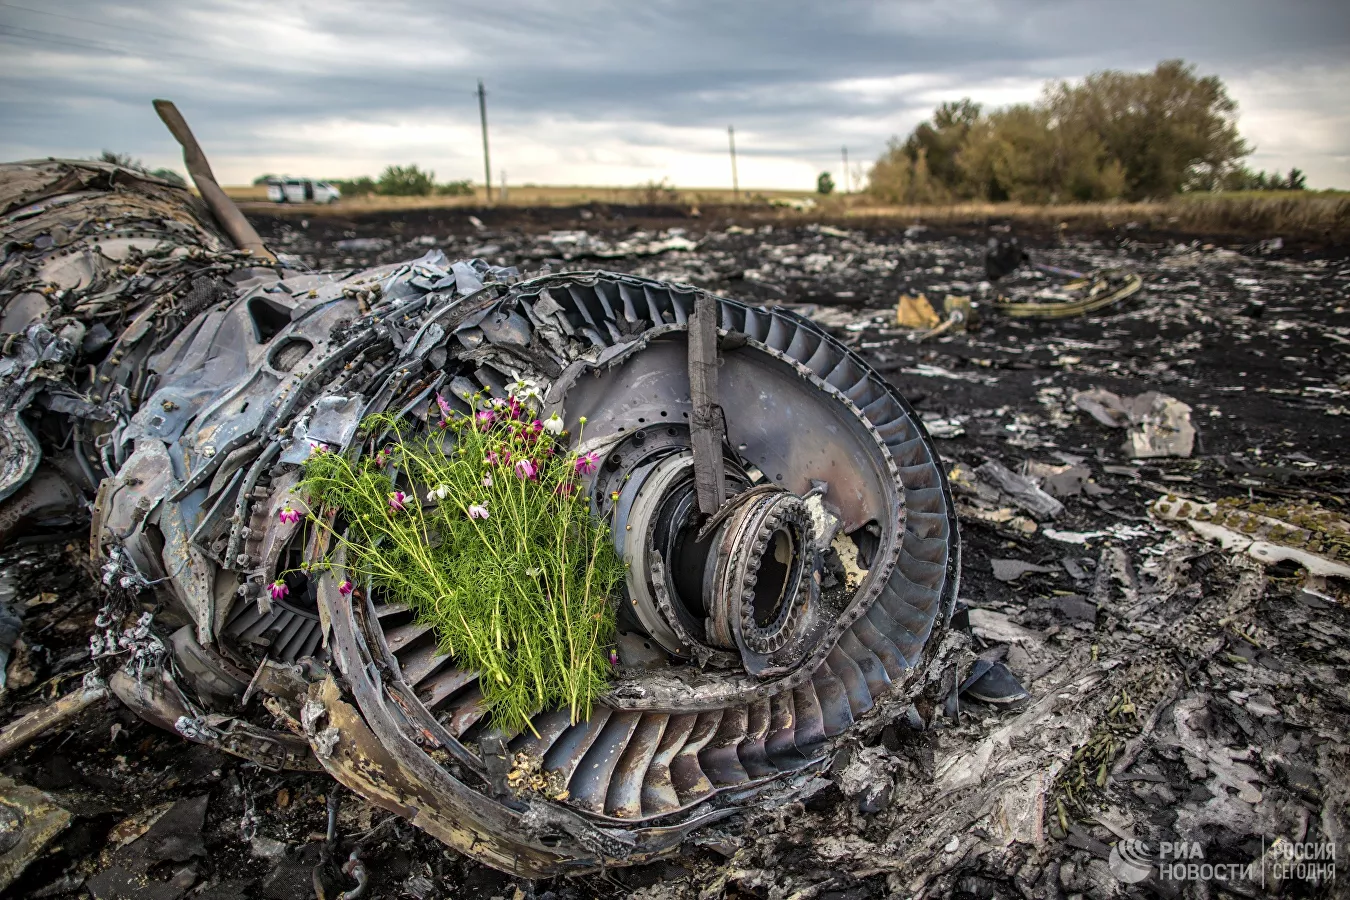 Was The Joint Investigation Team's Work On The MH17 Tragedy Adequate At All?